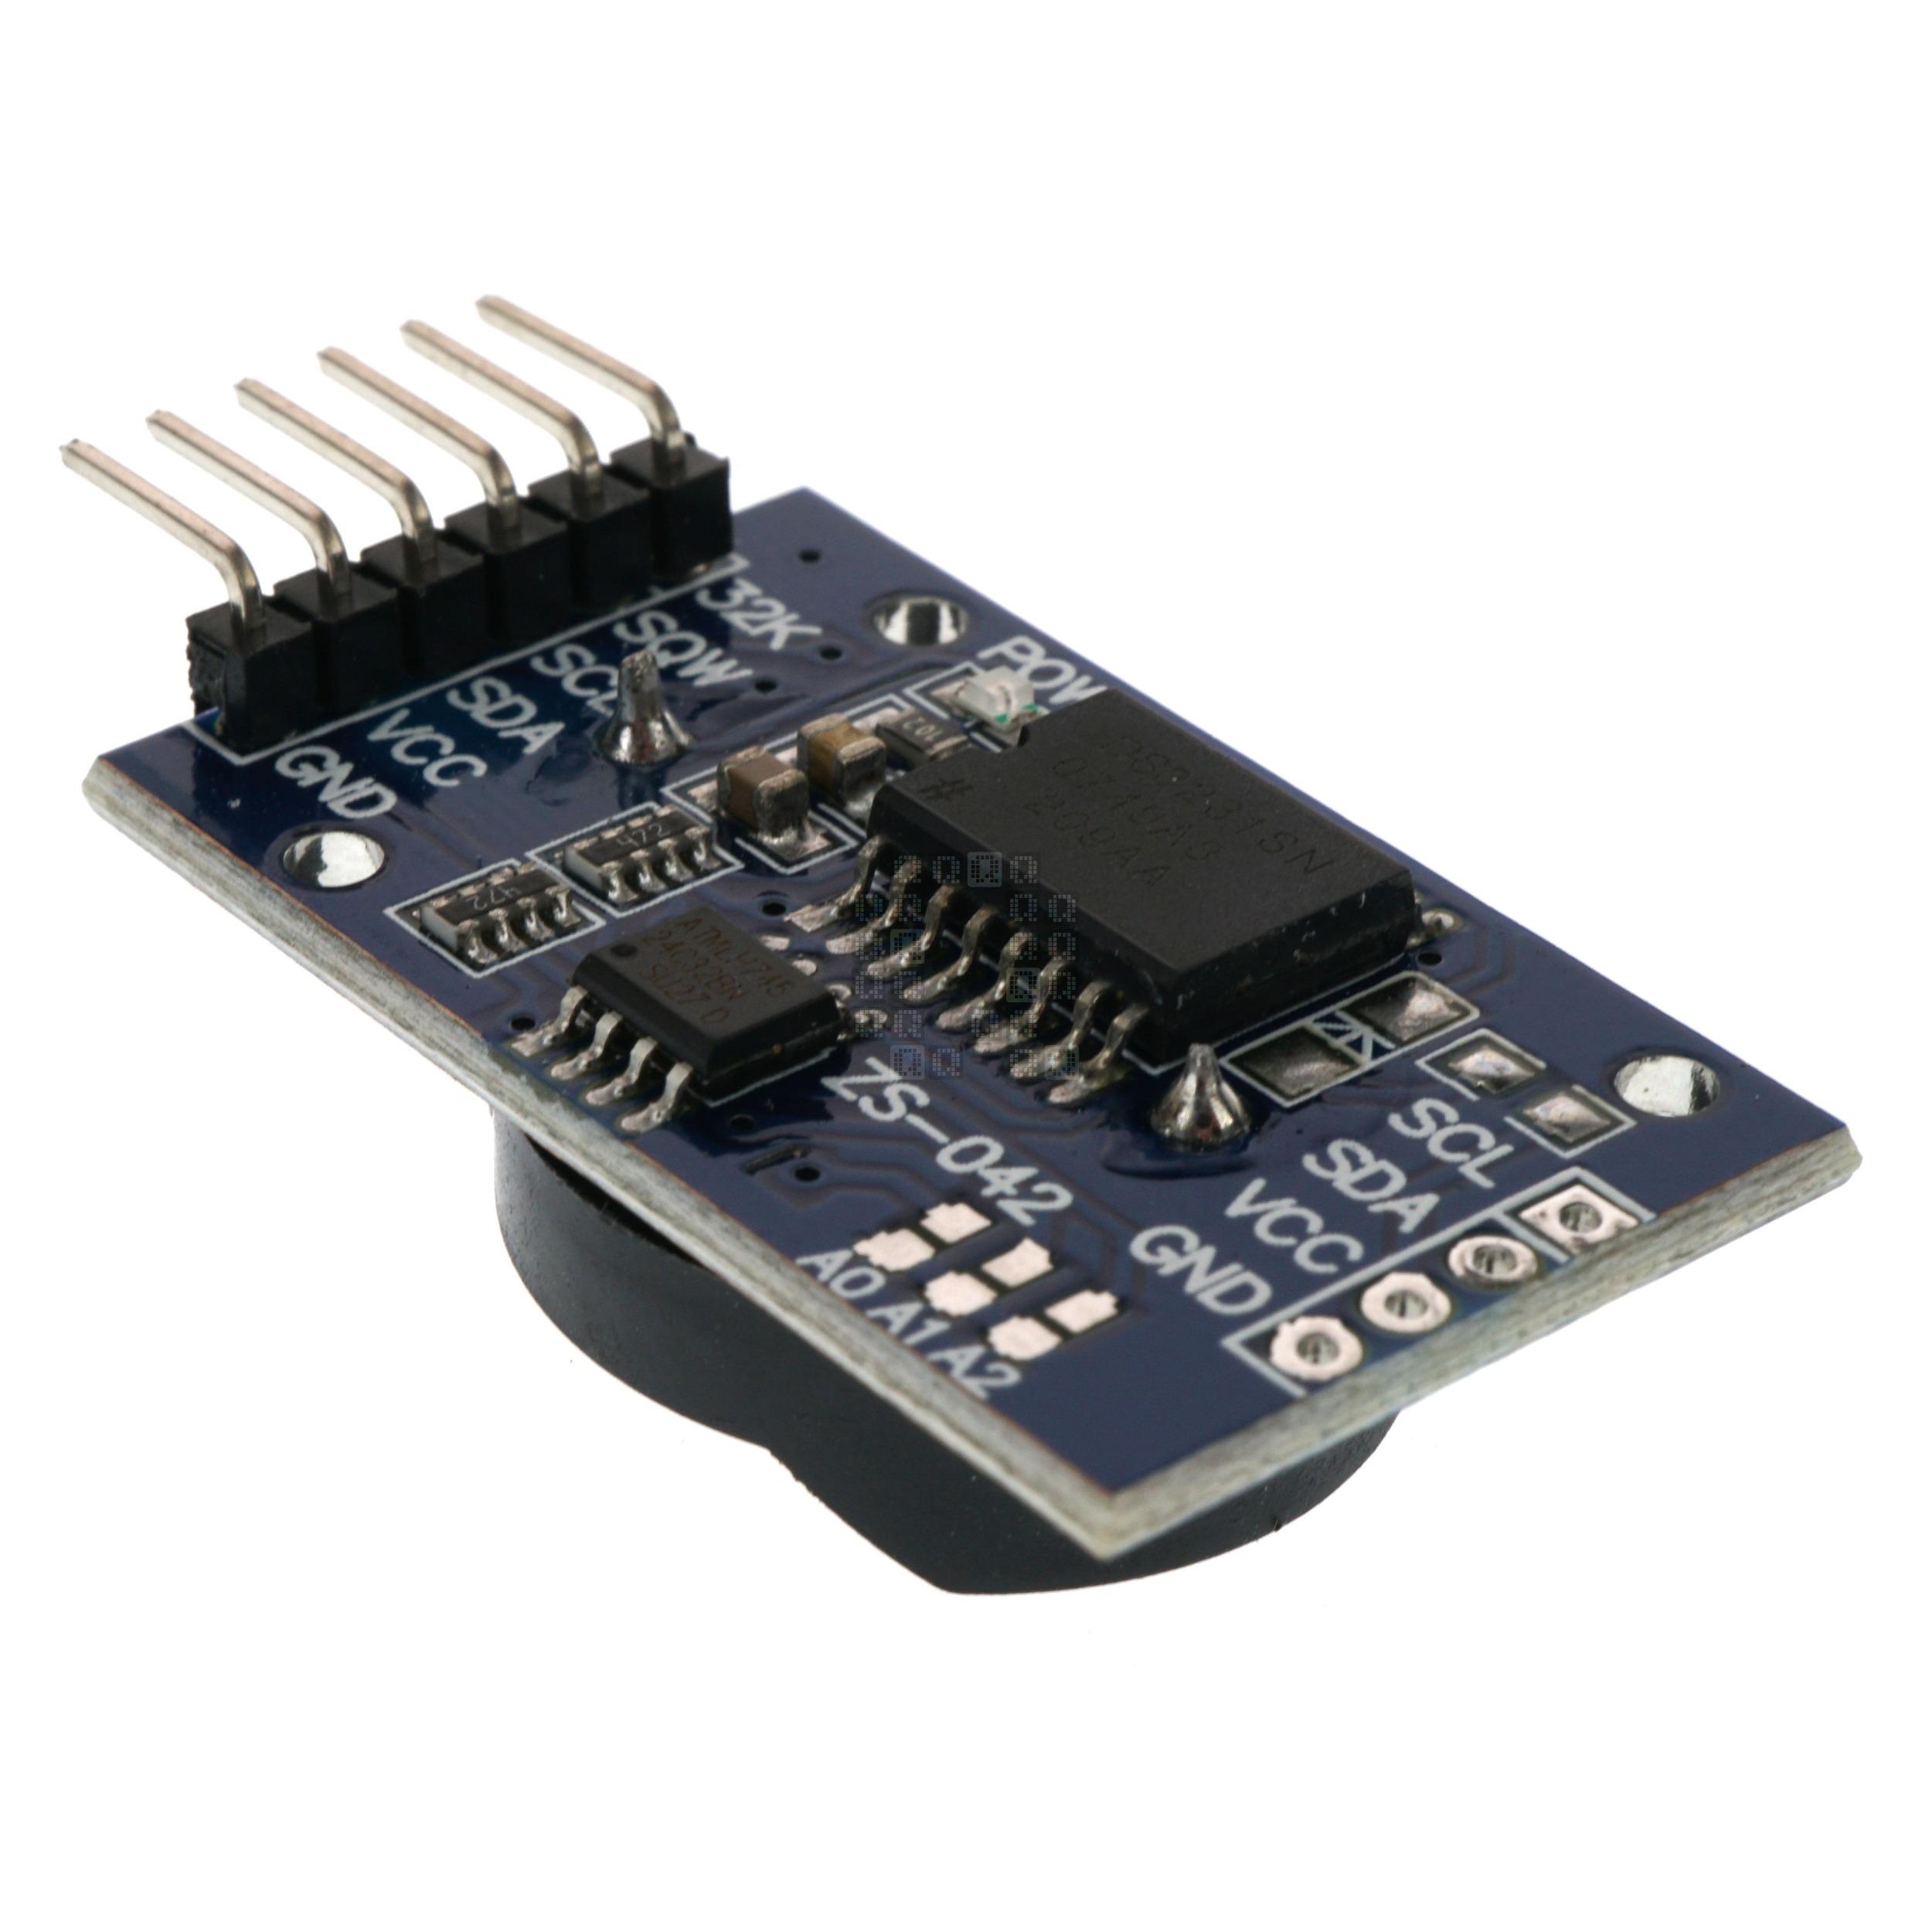 DS3231 I2C Precision Real Time Clock Module, 3.3-5VDC, uses CR2032 battery